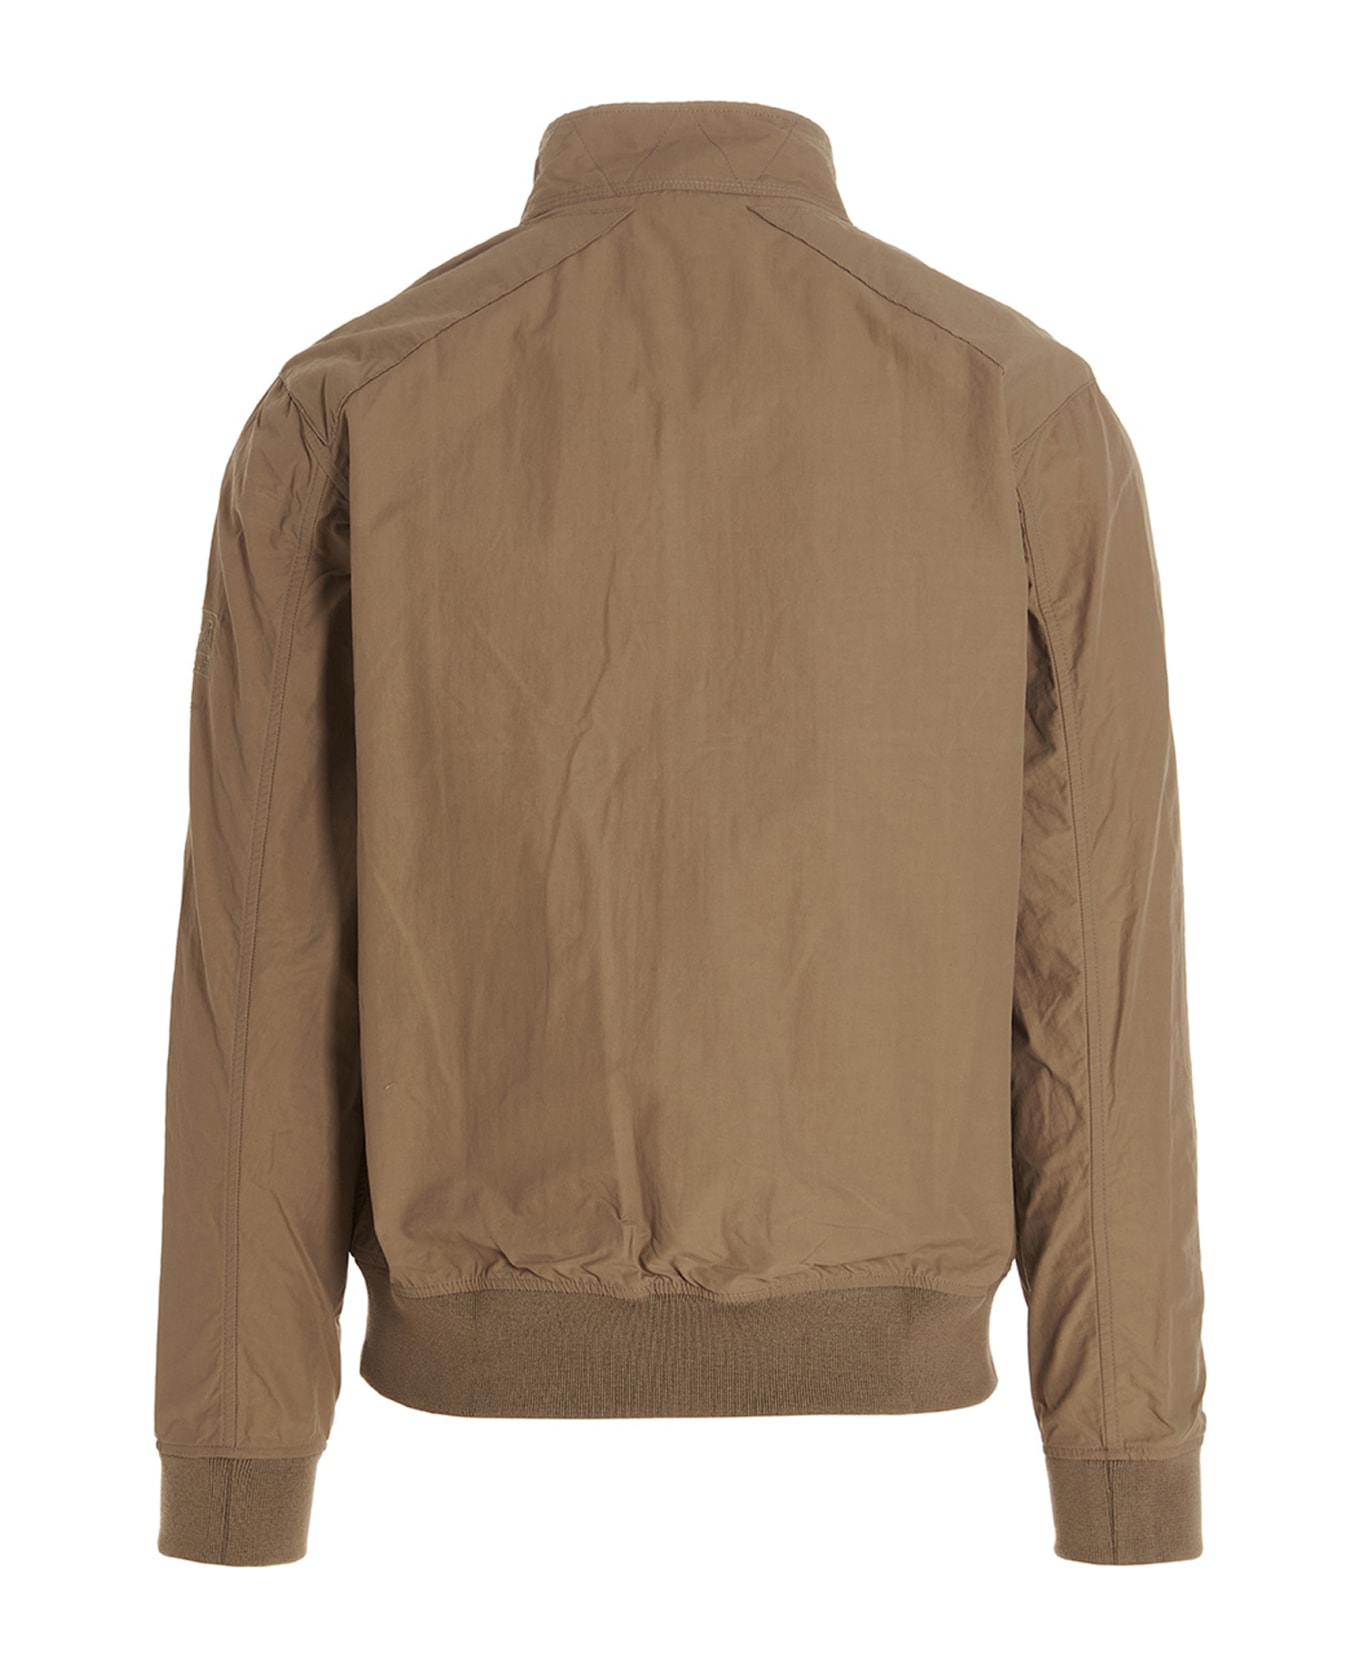 Barbour Smq Rectifier Jacket - Military Brown